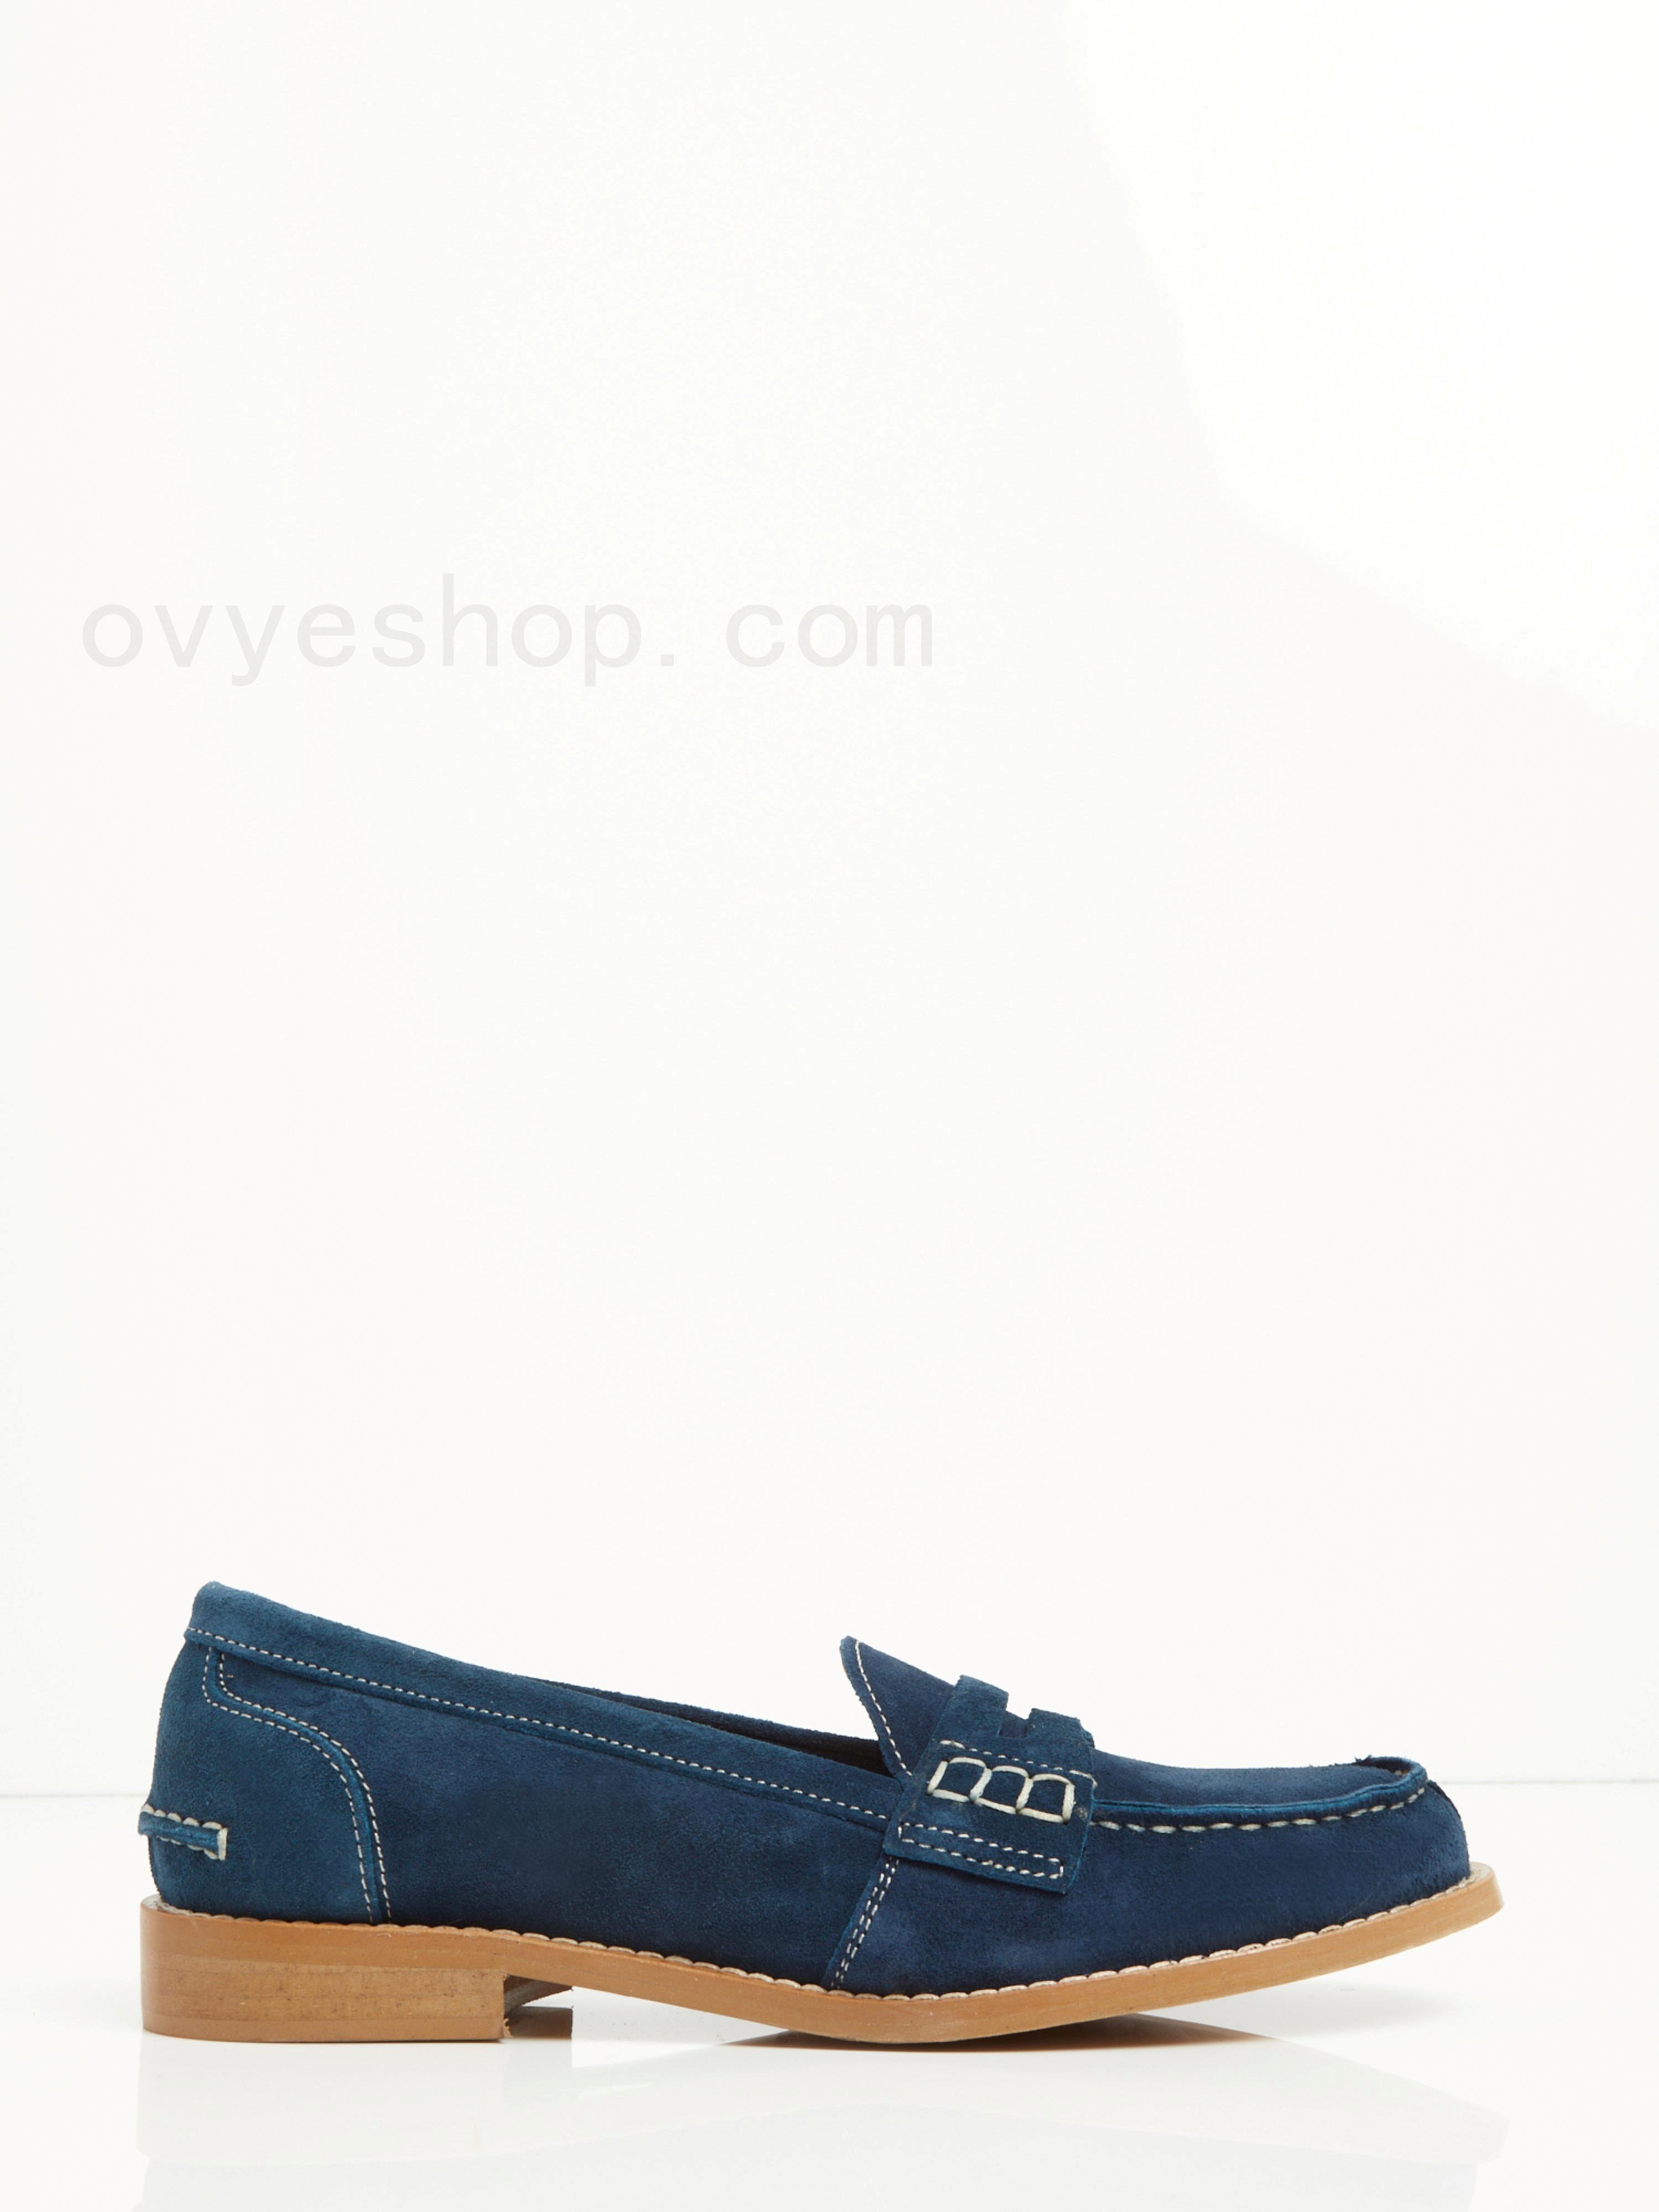 ovy&#232; outlet Suede Loafer F0817885-0431